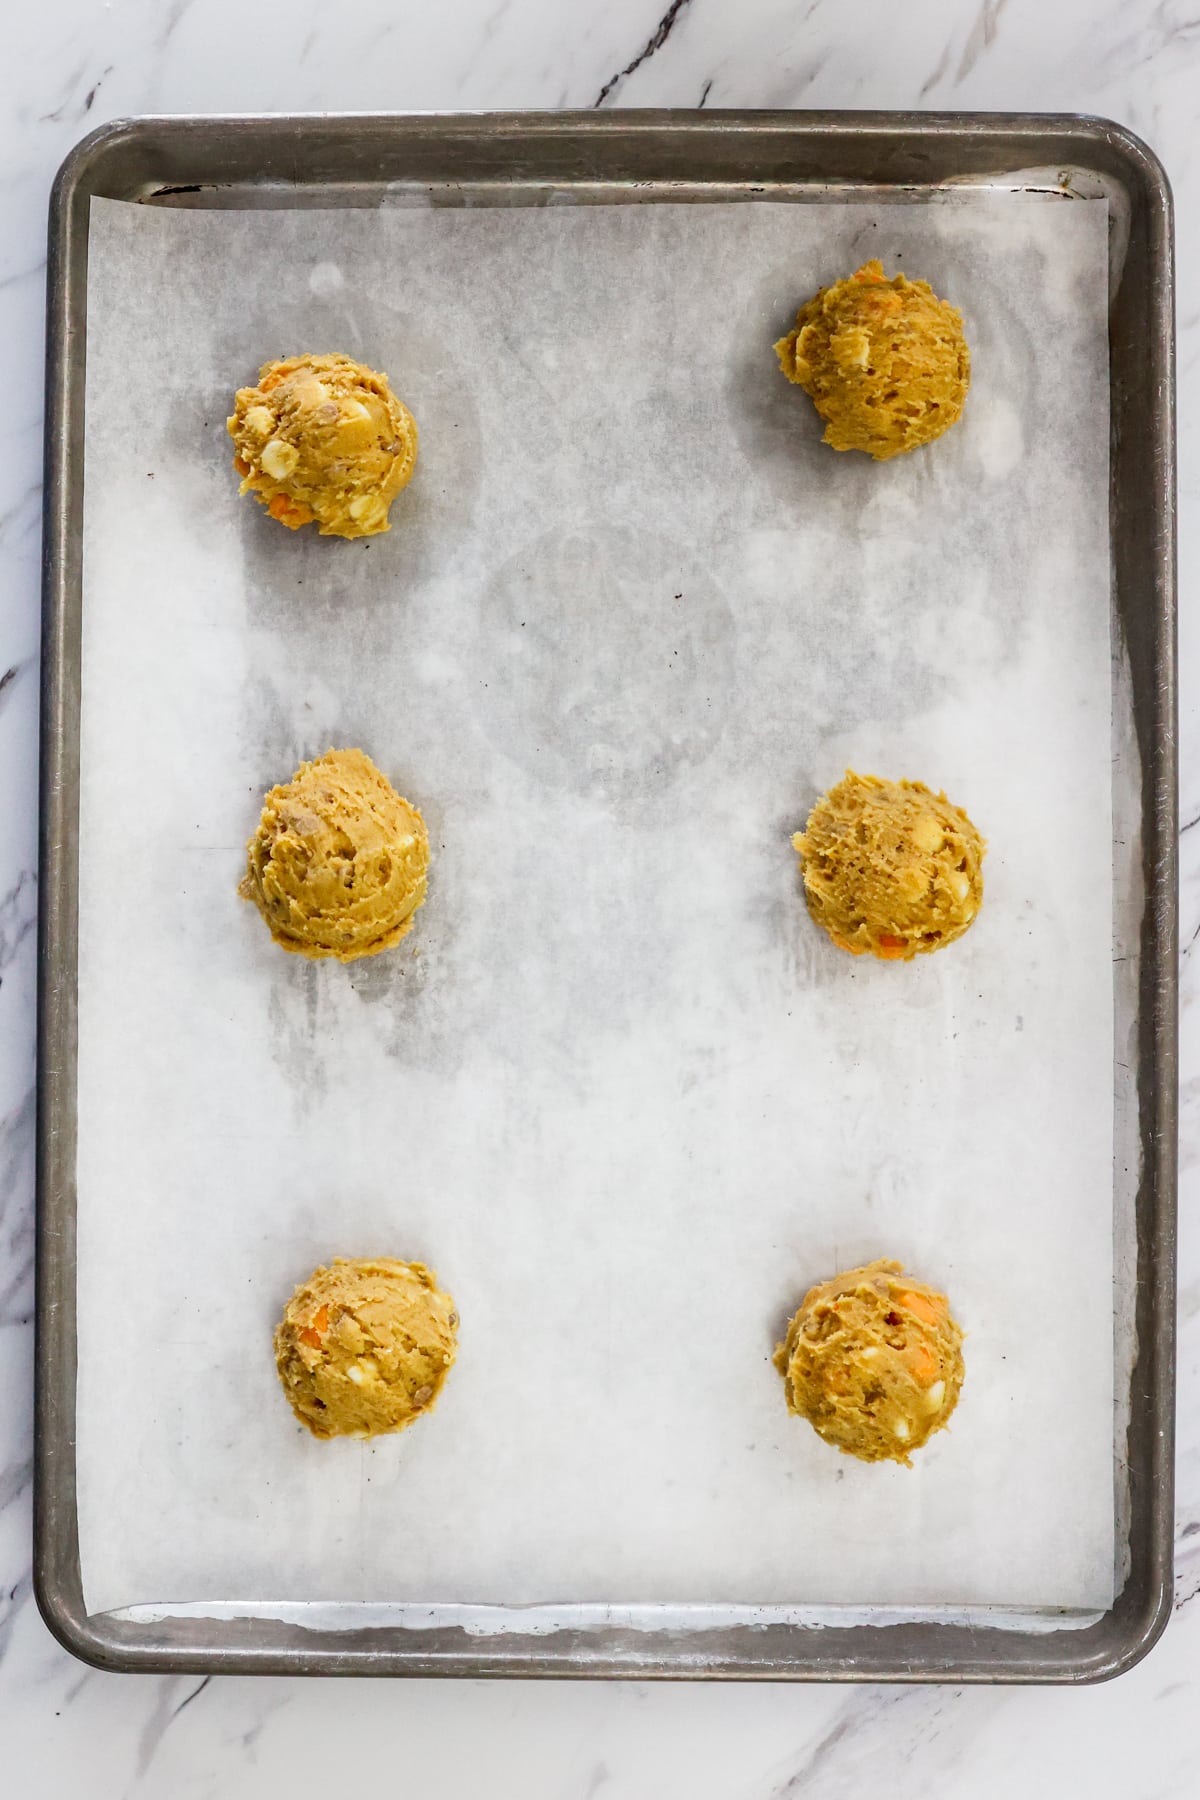 Top view of balls of cookie dough on a baking tray.